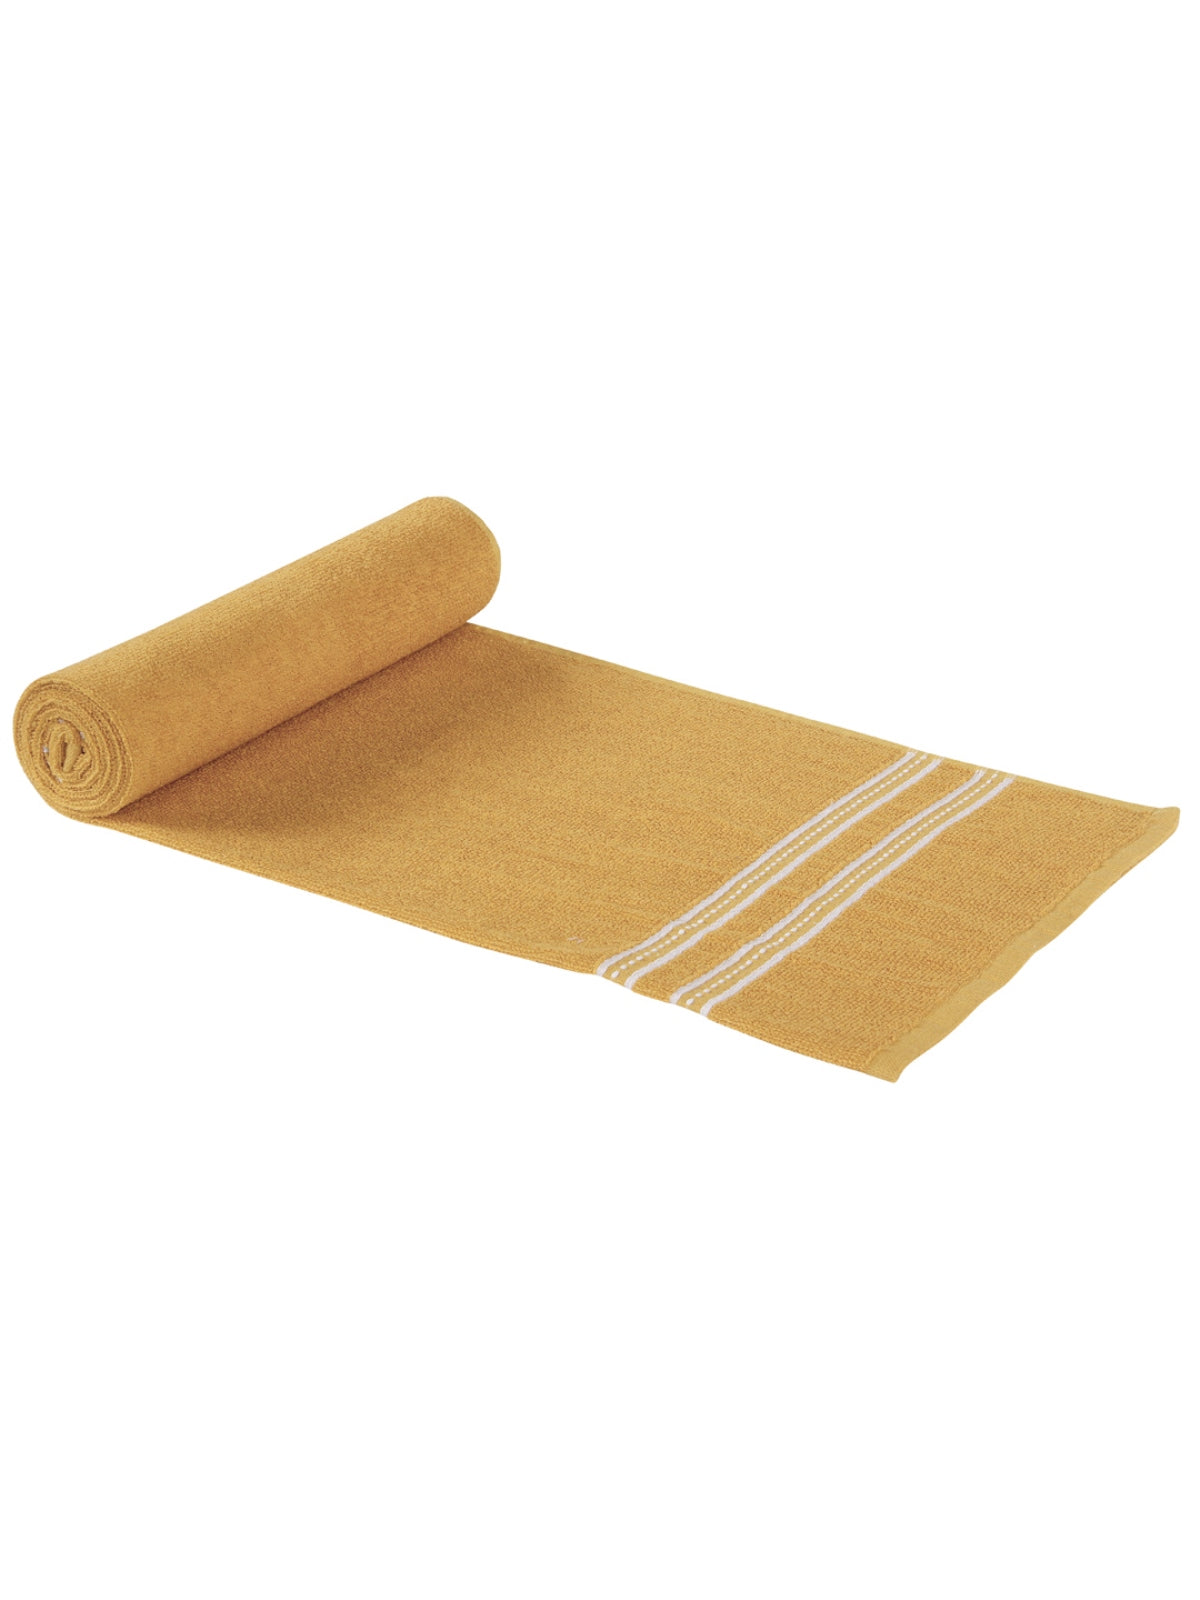 Yellow Solid Patterned Cotton Towel